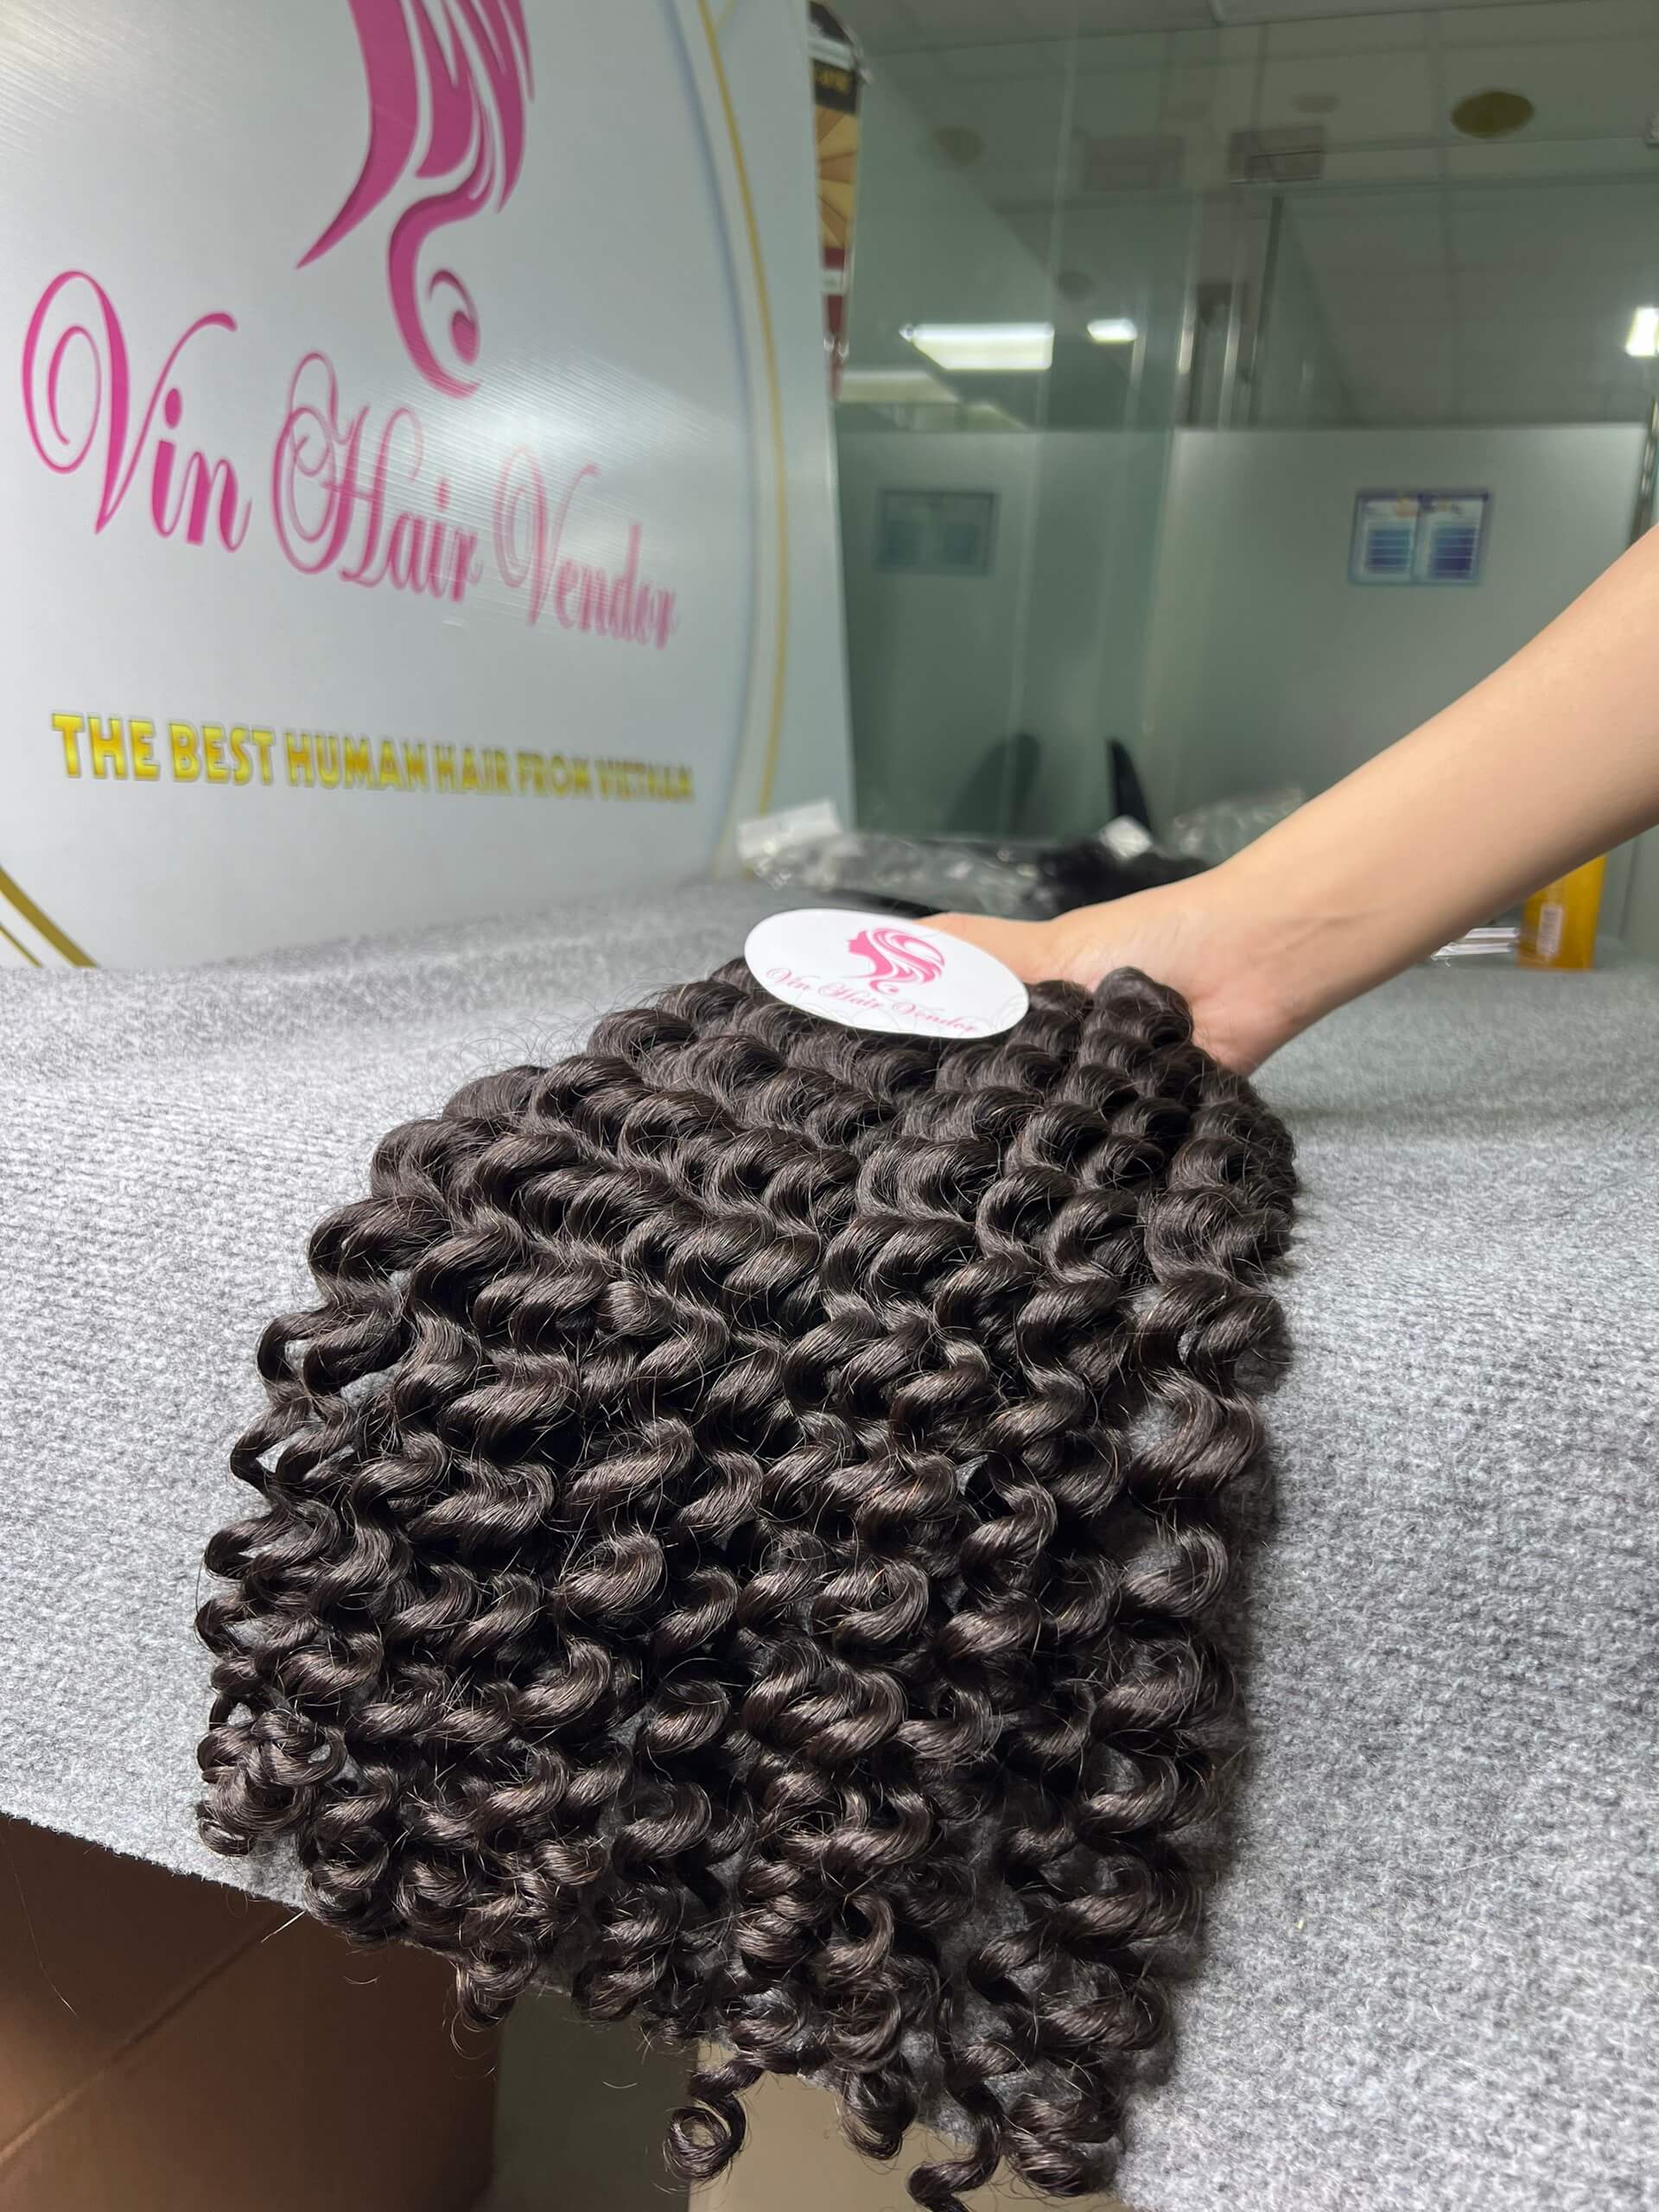 wholesale-virgin-hair-factory-everything-you-need-to-know-virgin-hair-factory-virgin-hair-factory-wholesale-12